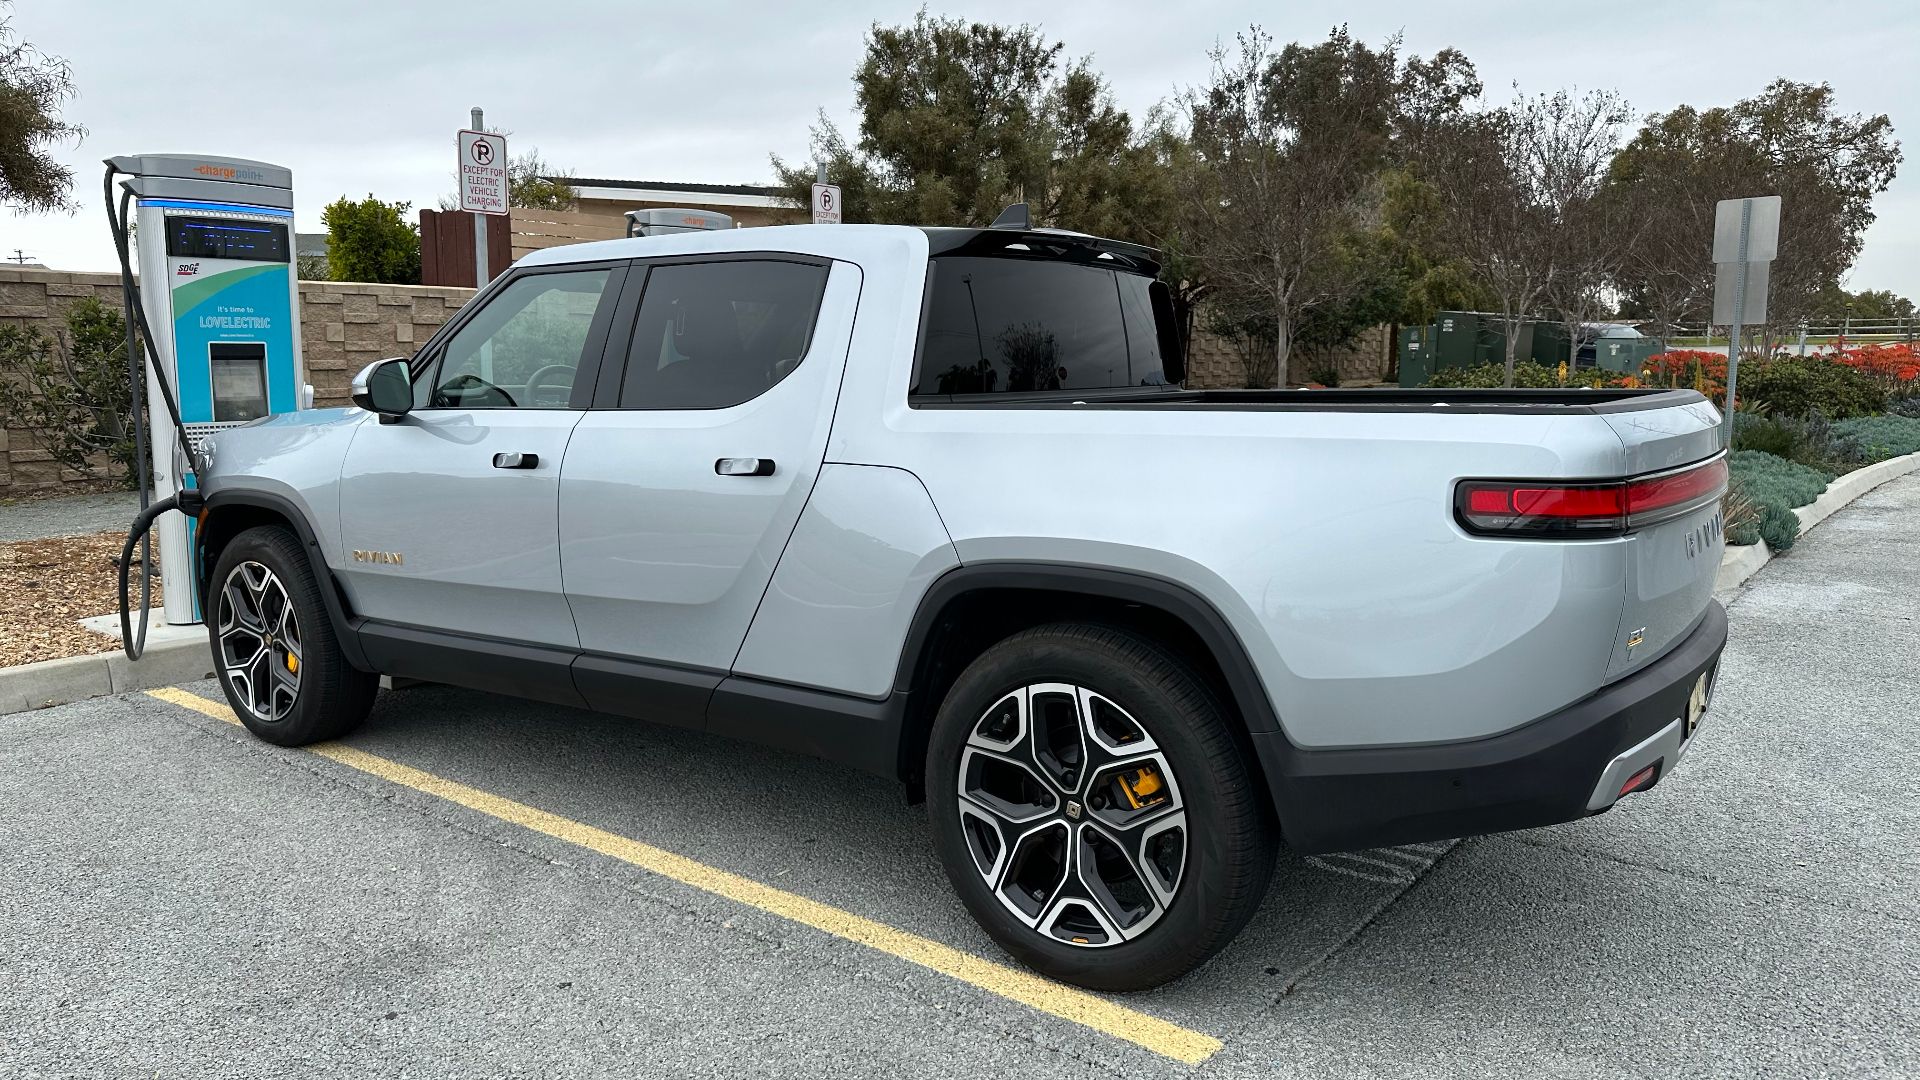 Rivian R1T at Chargepoint station. 